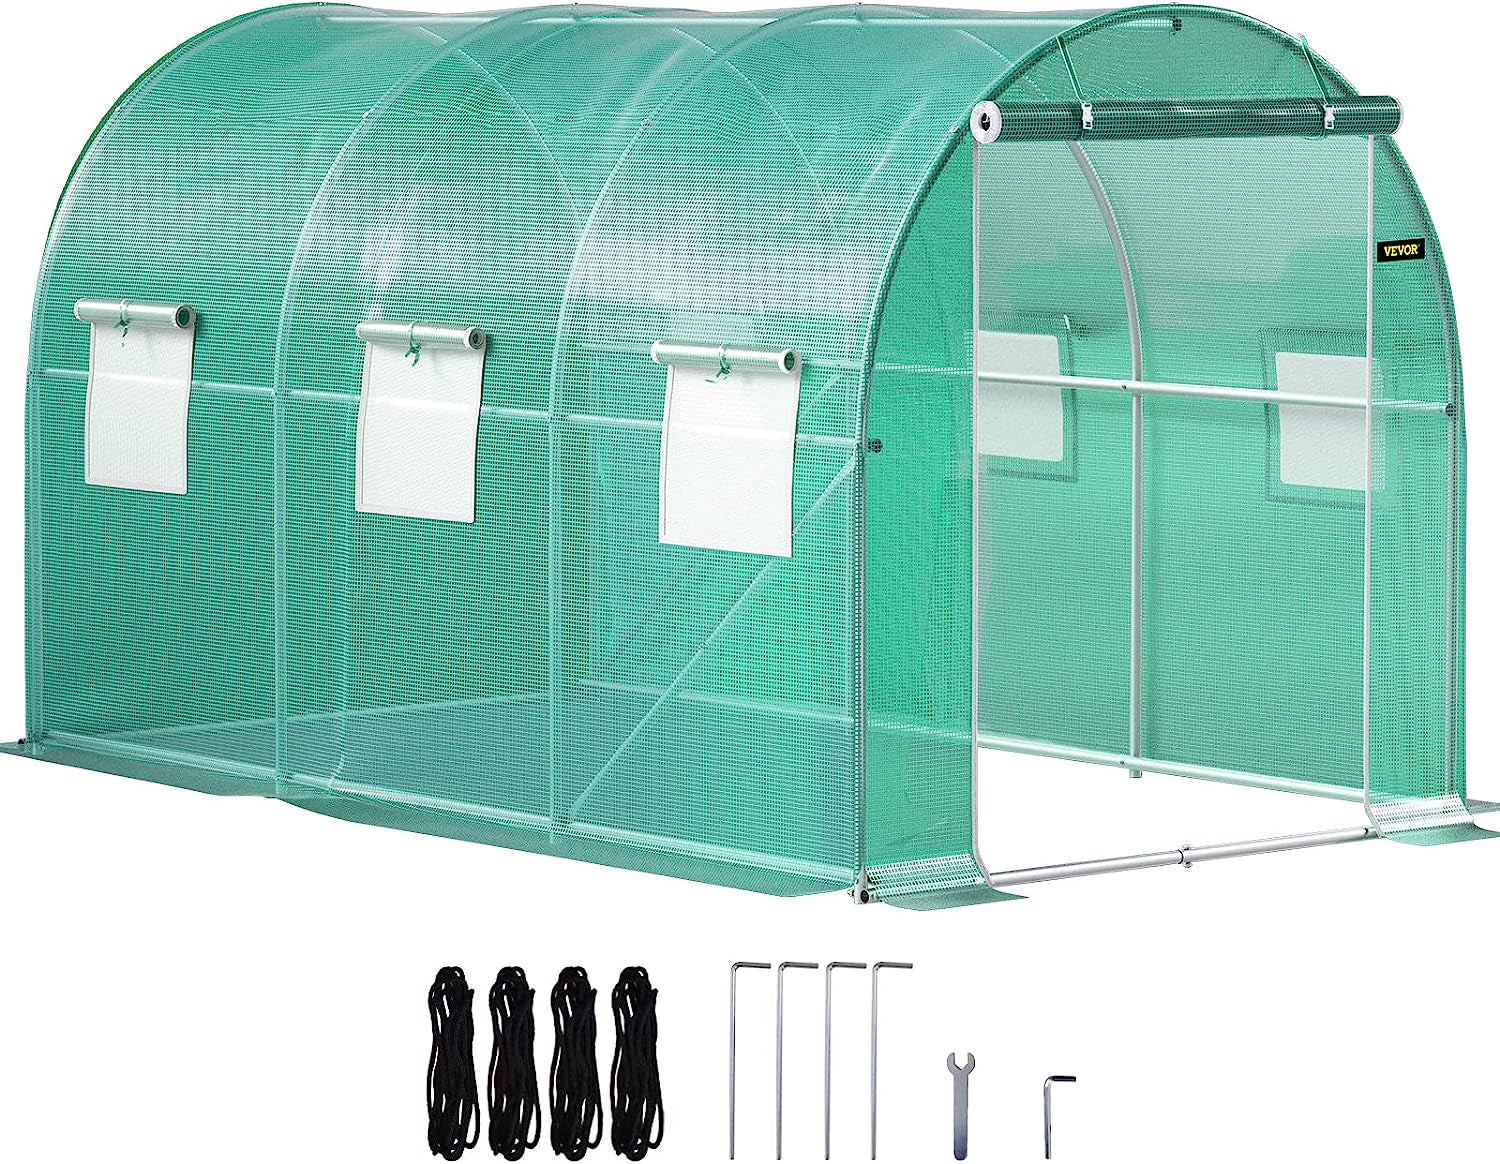 12 X 7 X 7 Ft Walk-In Tunnel Greenhouse, Portable Plant Hot House W/ Galvanized Steel Hoops, 1 Top Beam, 2 Diagonal Poles, 2 Zippered Doors & 6 Roll-Up Windows, Green - Design By Technique